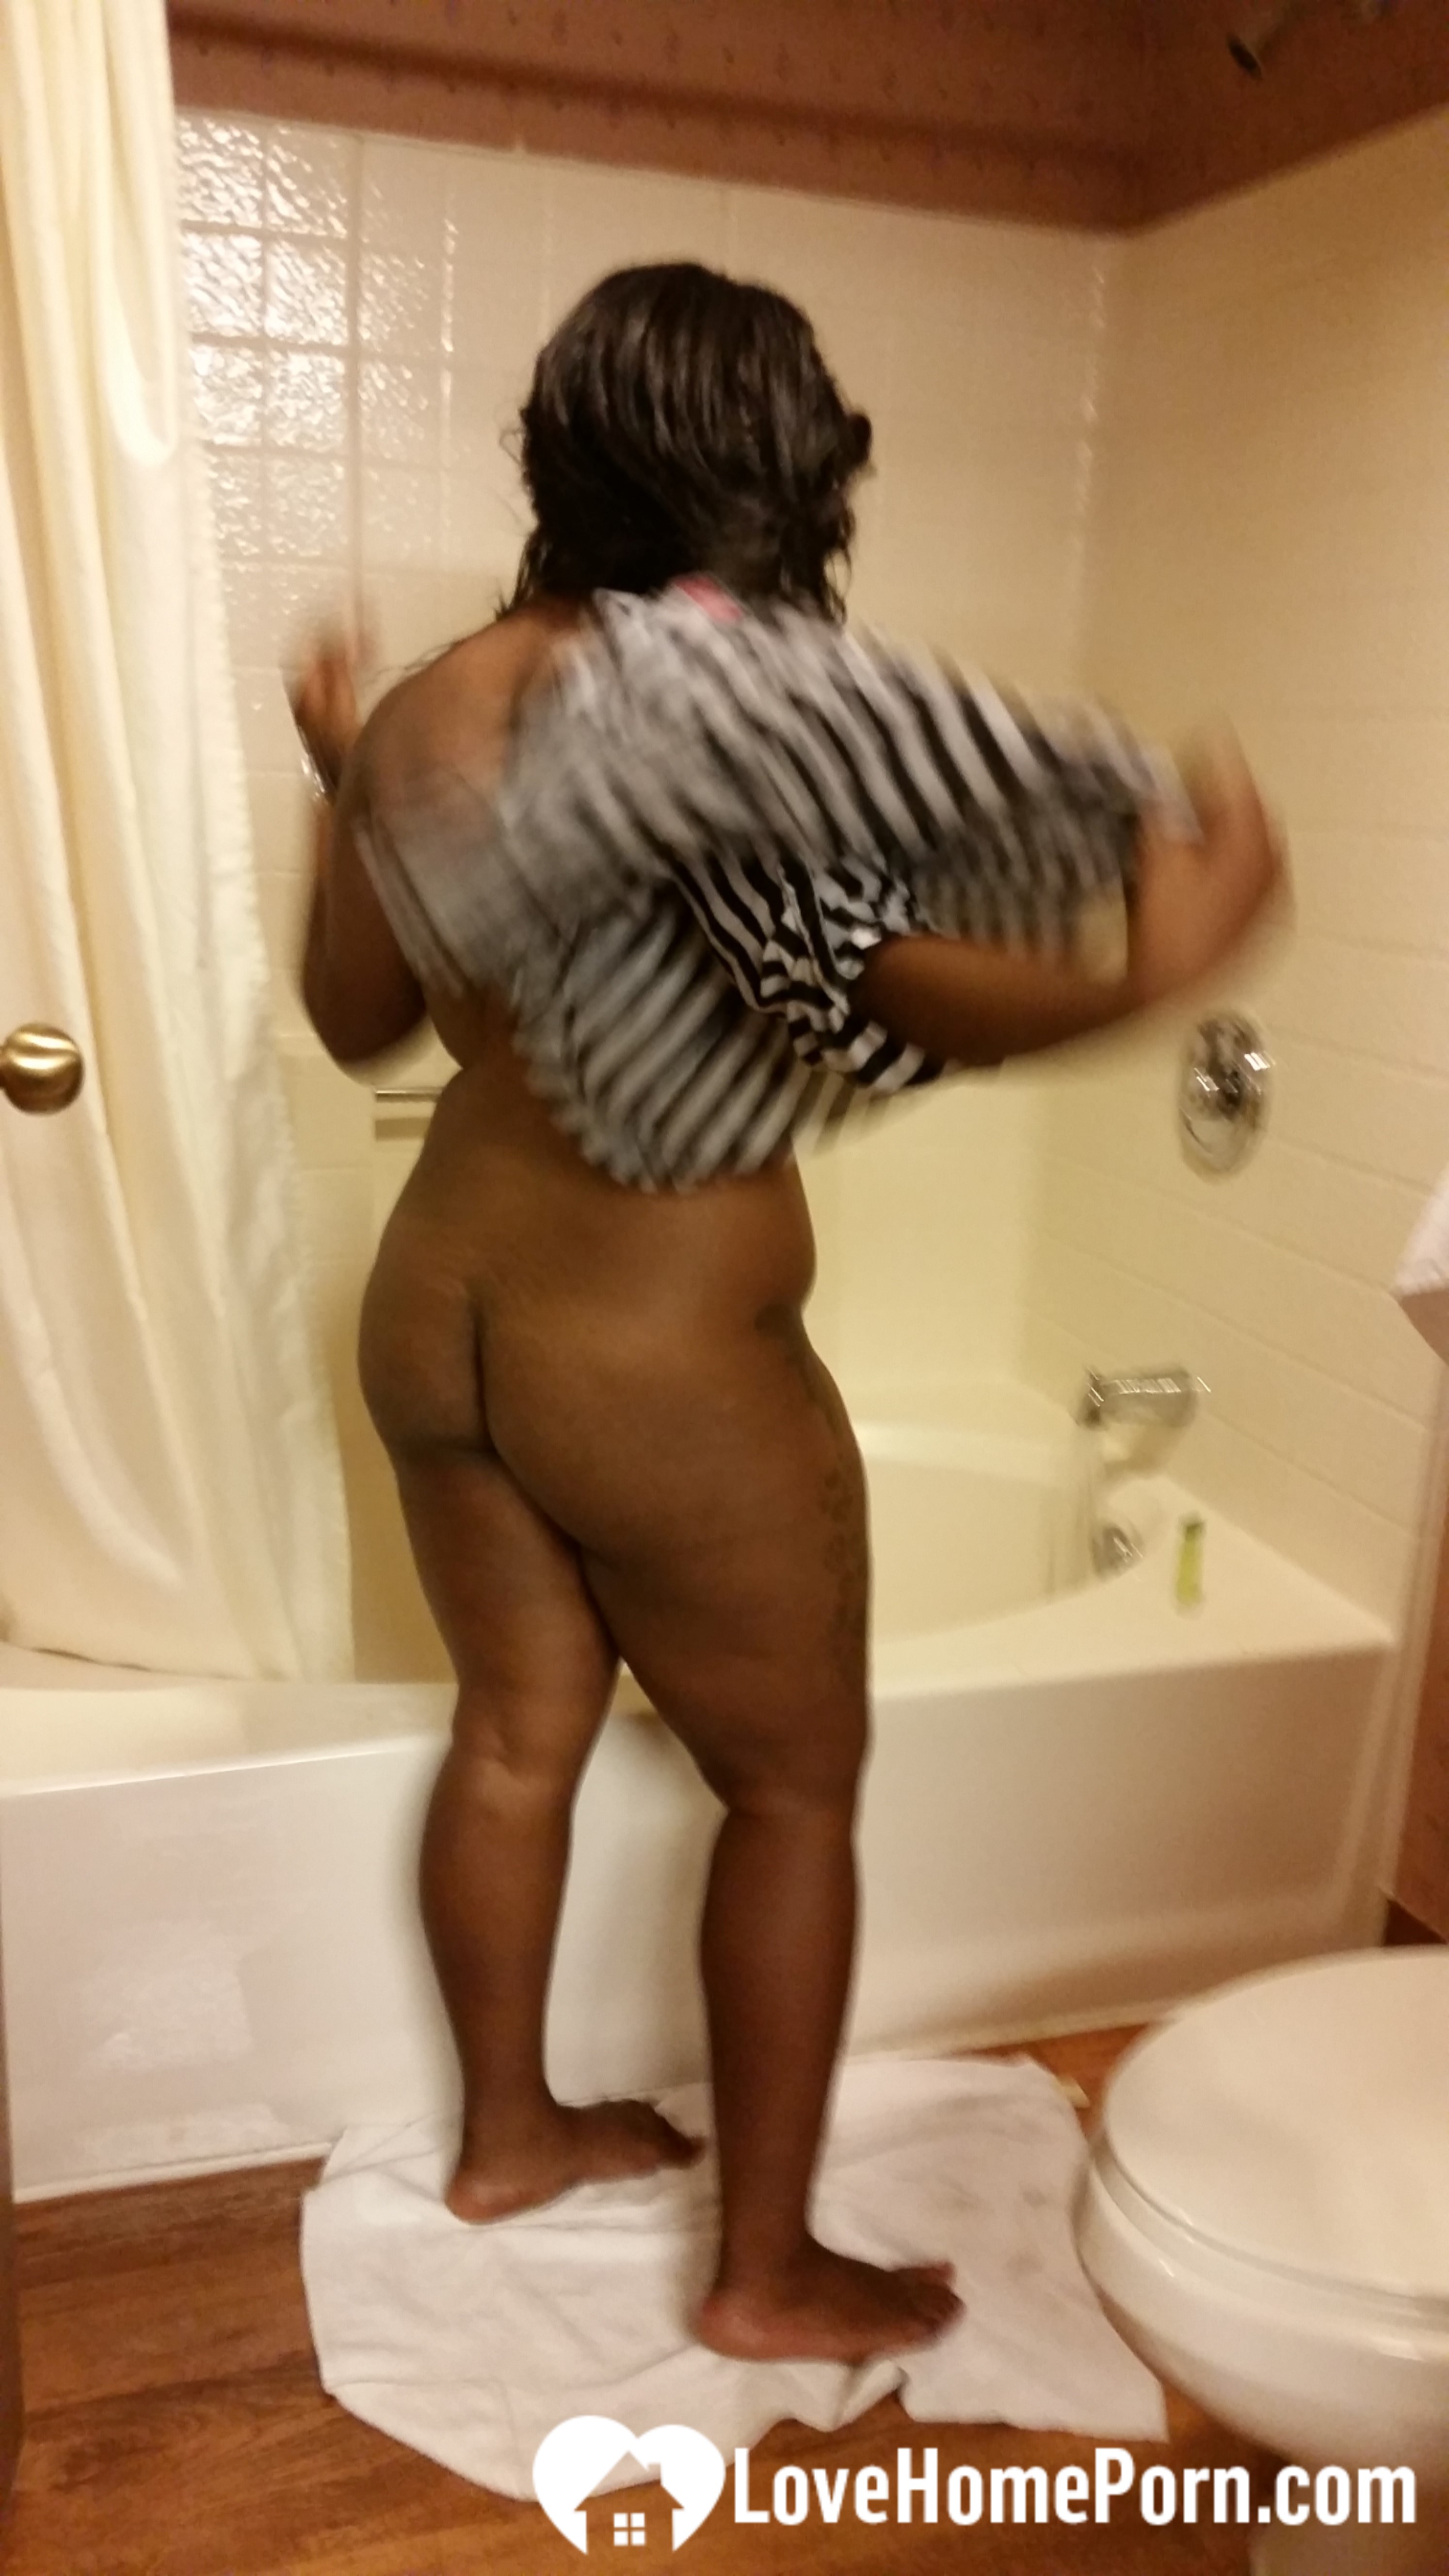 Black honey gets recorded as she showers